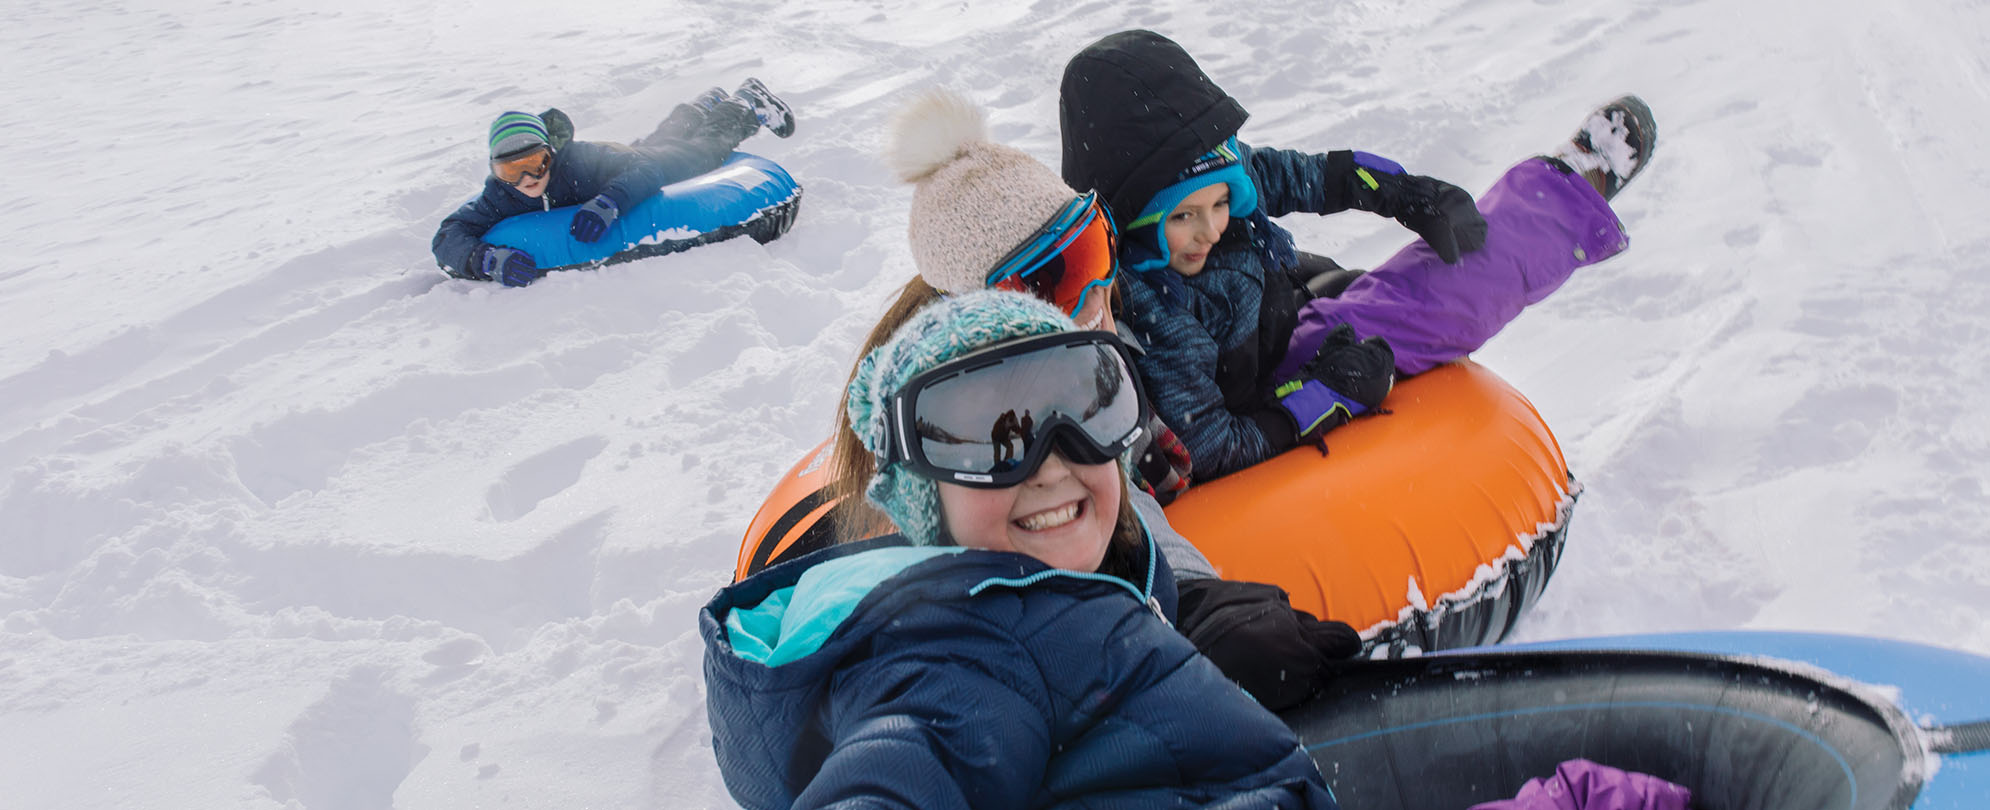 A smiling girl and her siblings wearing winter gear and goggles tubing in the snow.